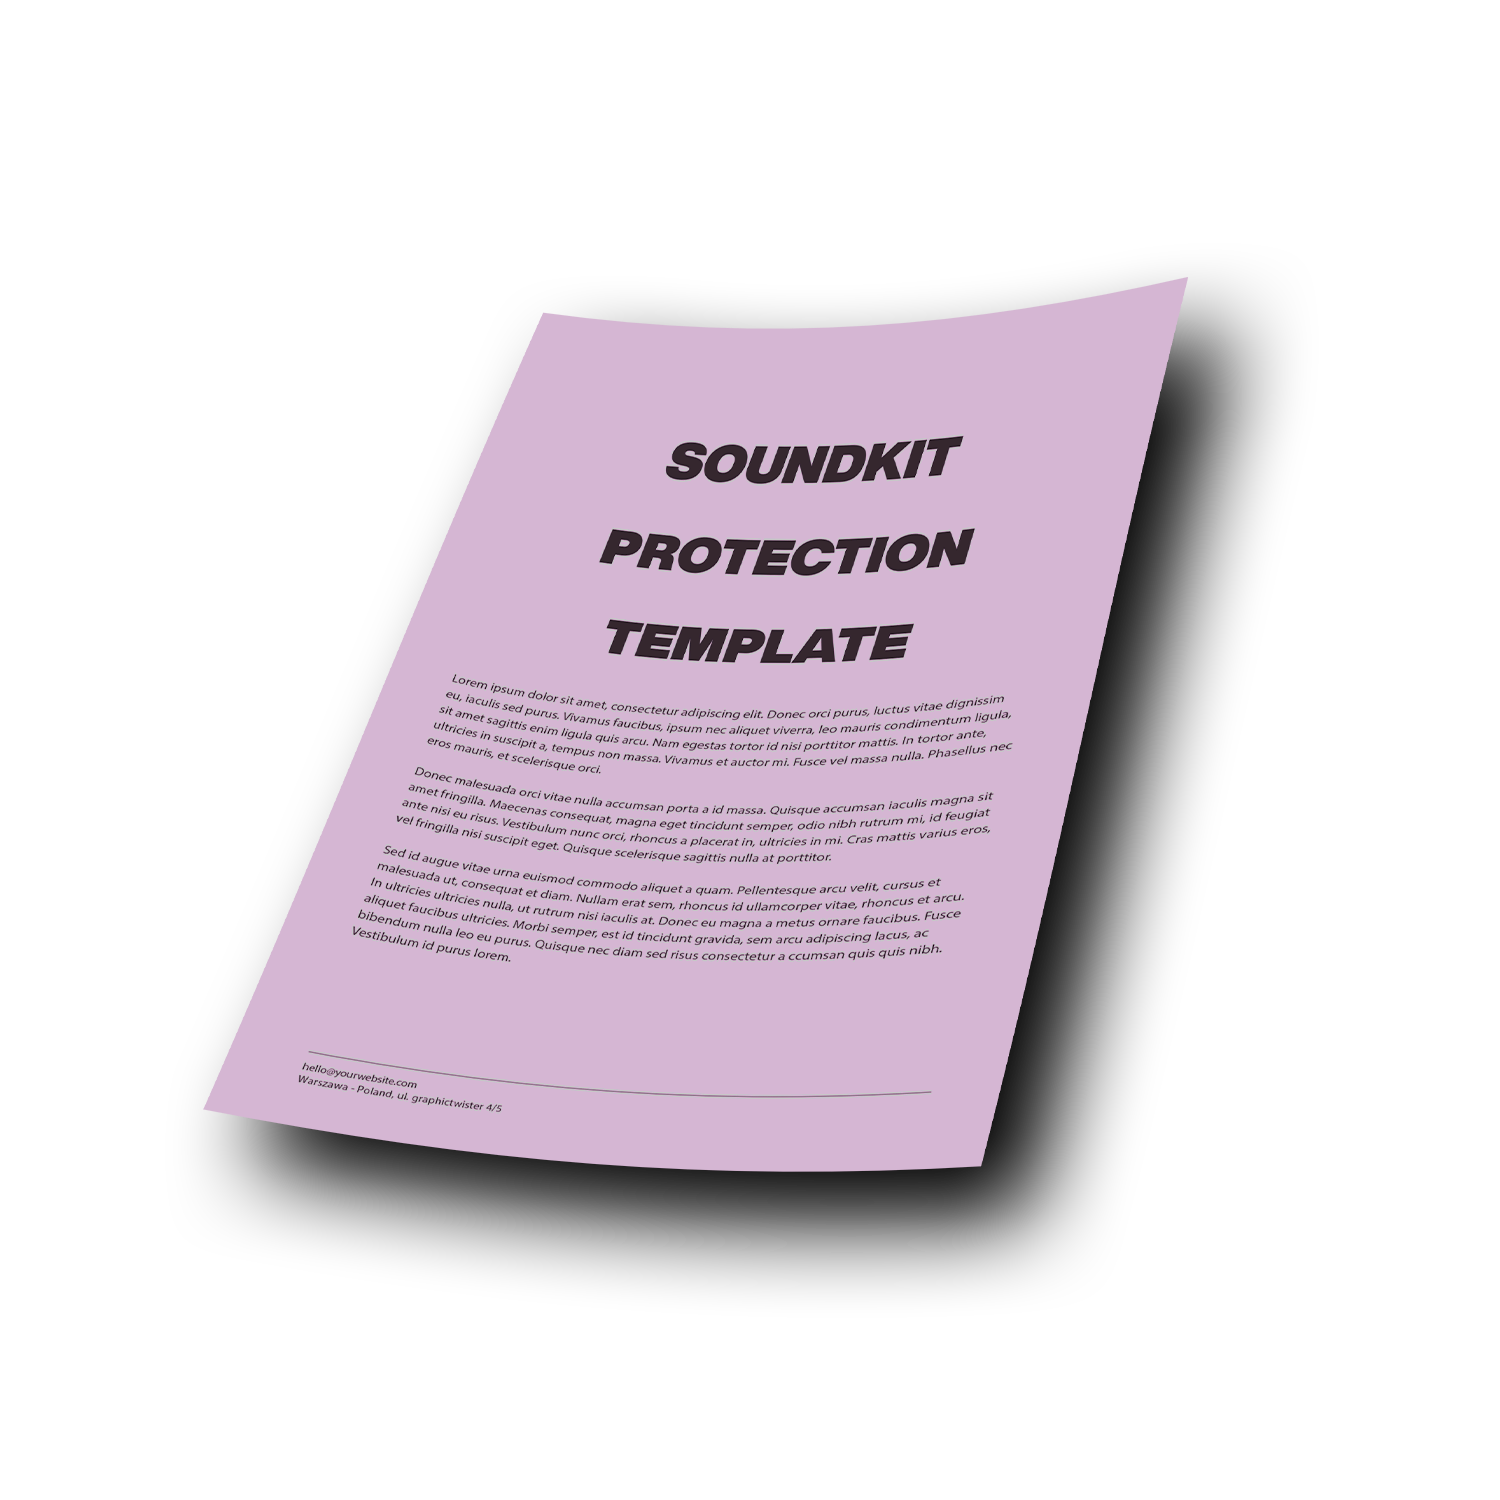 [Template] Soundkit Protection Document